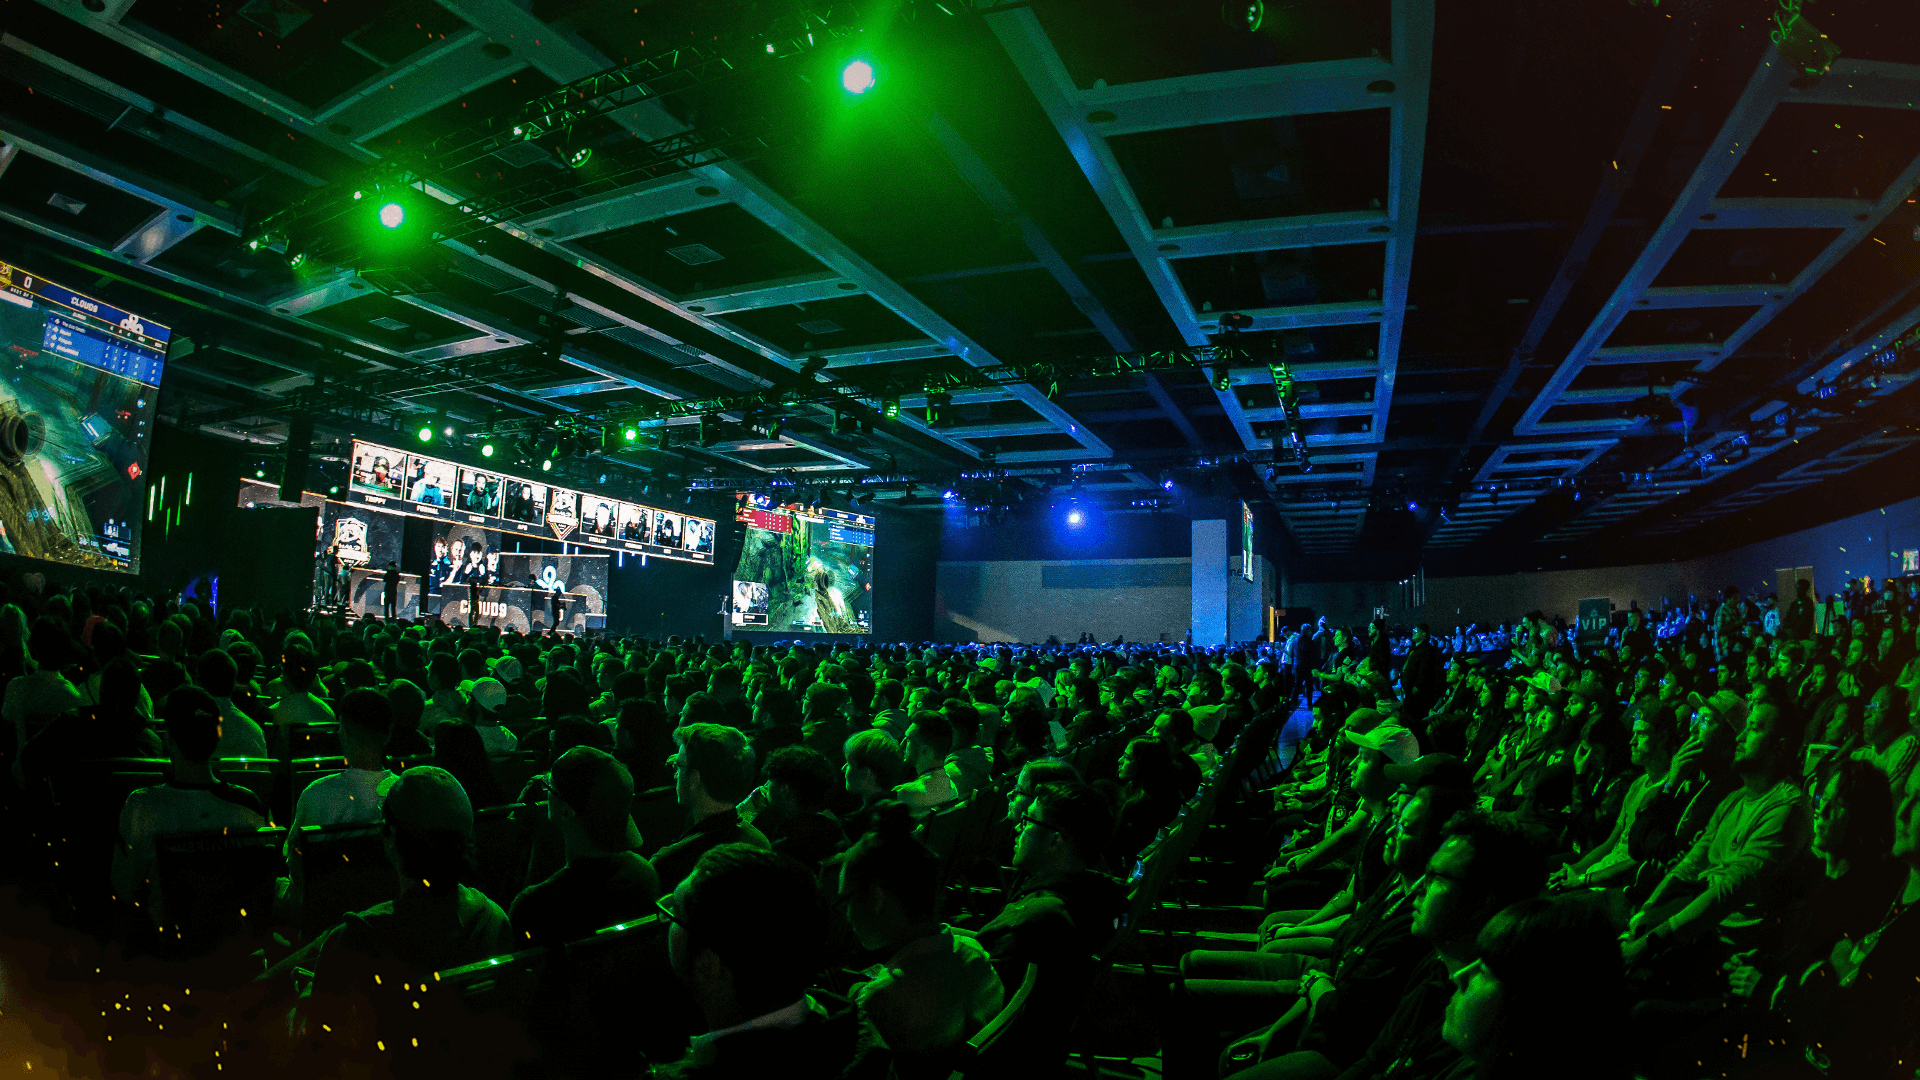 Packed house at the Halo World Championship